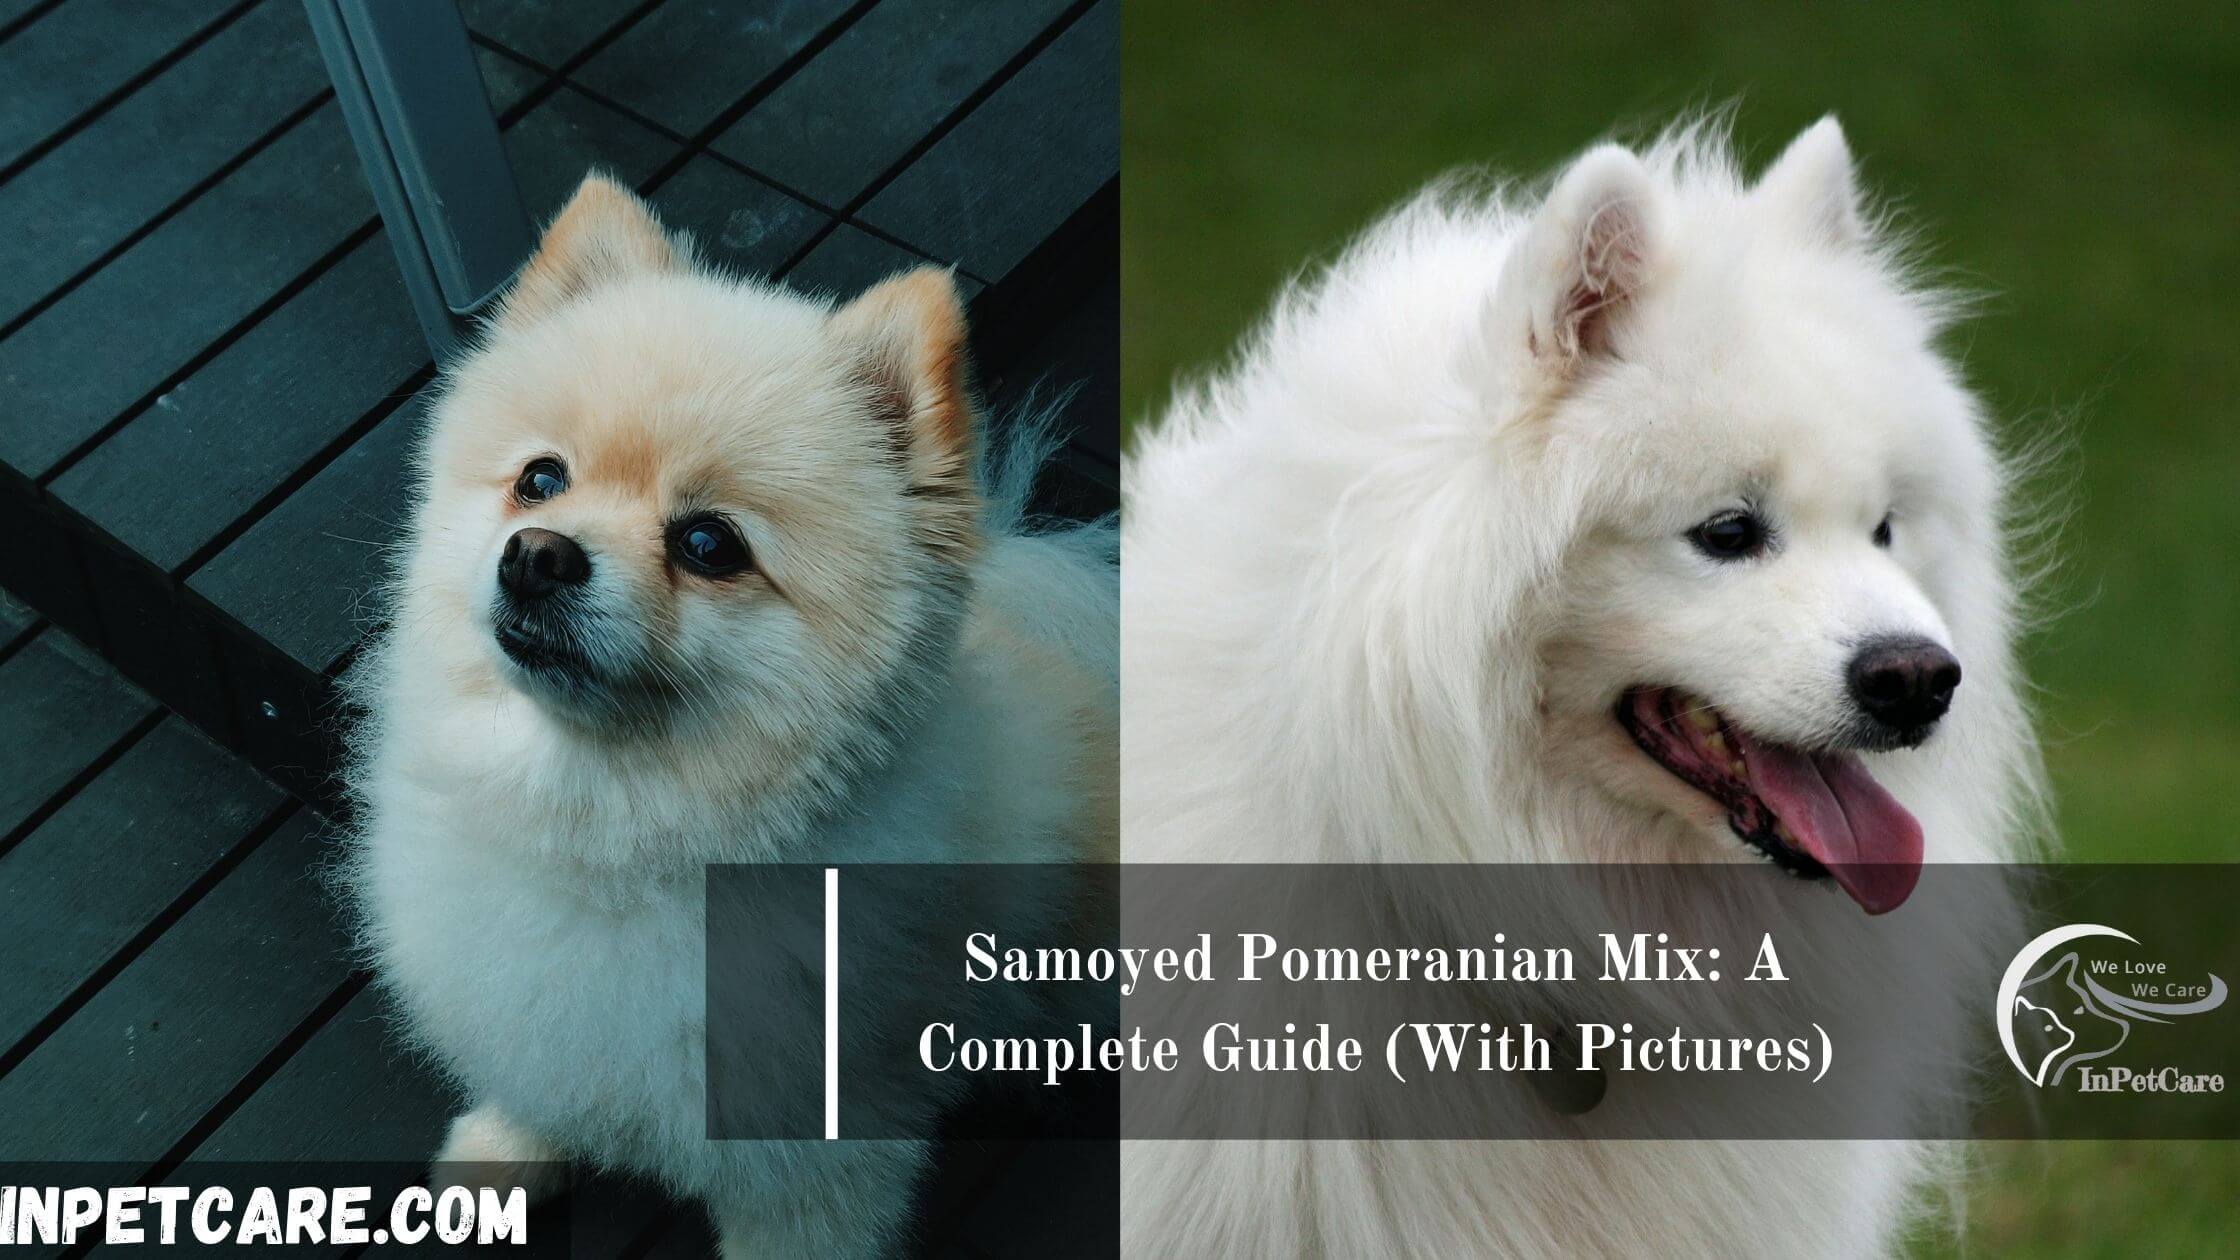 Samoyed Pomeranian Mix: A Complete Guide (With Pictures)